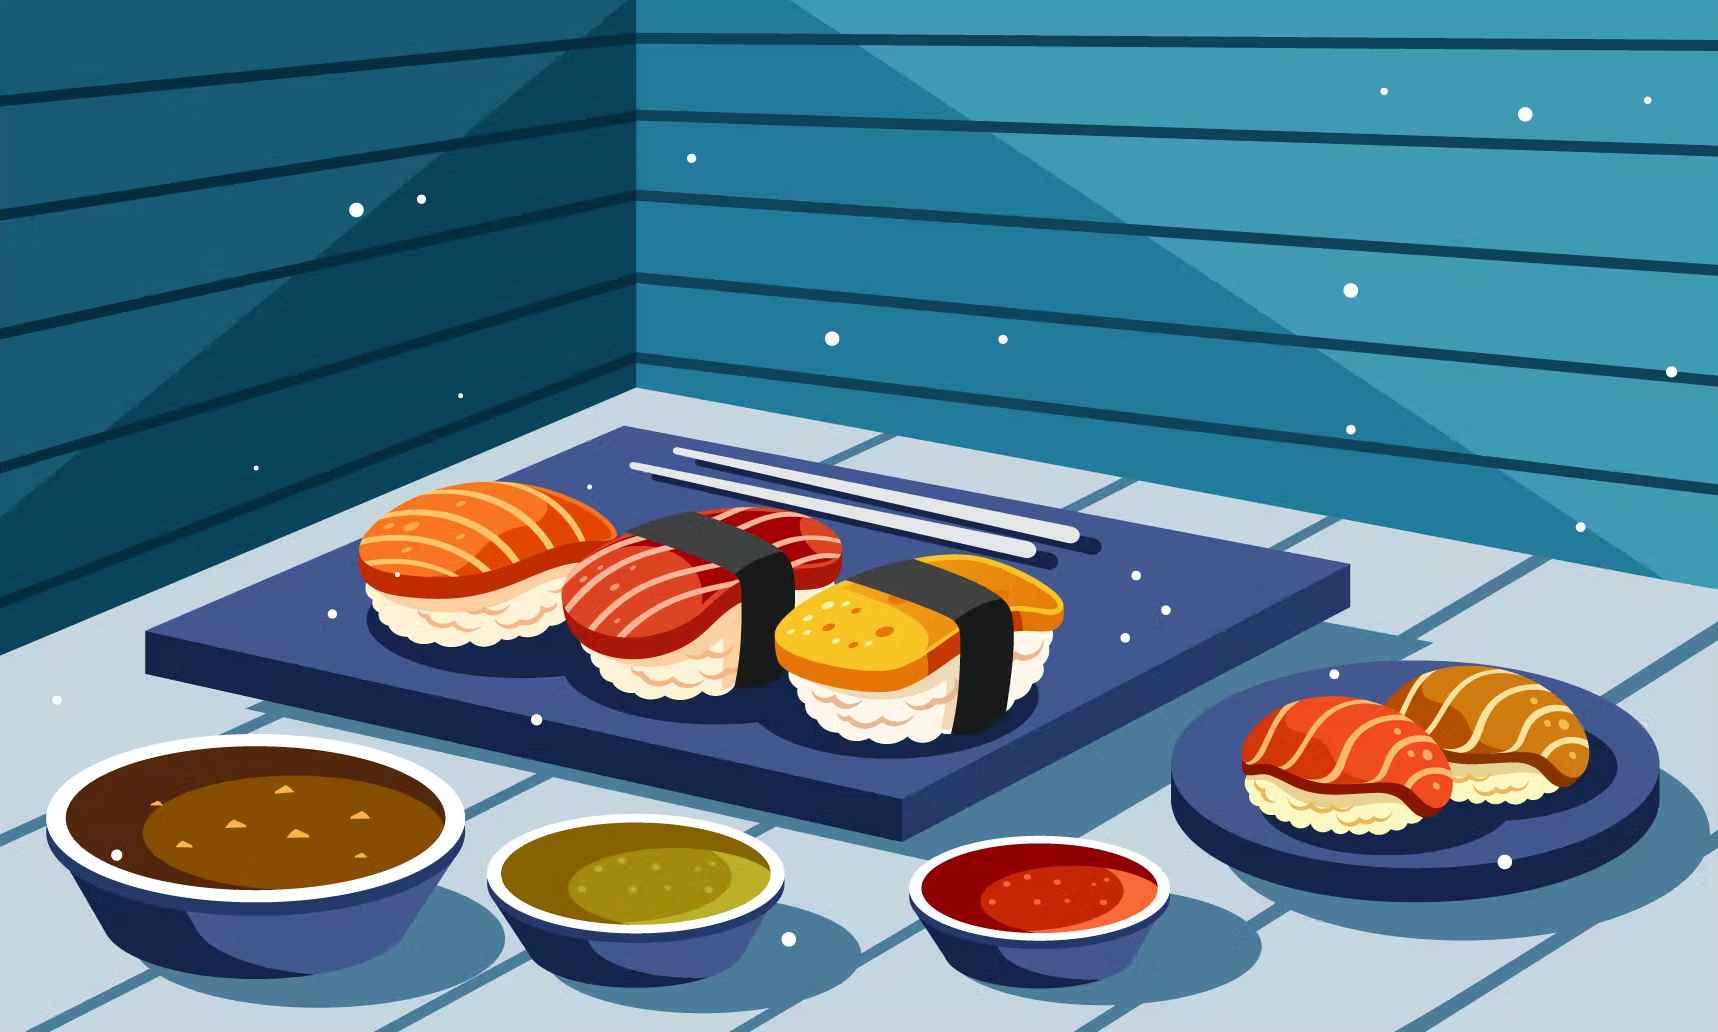 An Illustration of sushi by IanMikraz